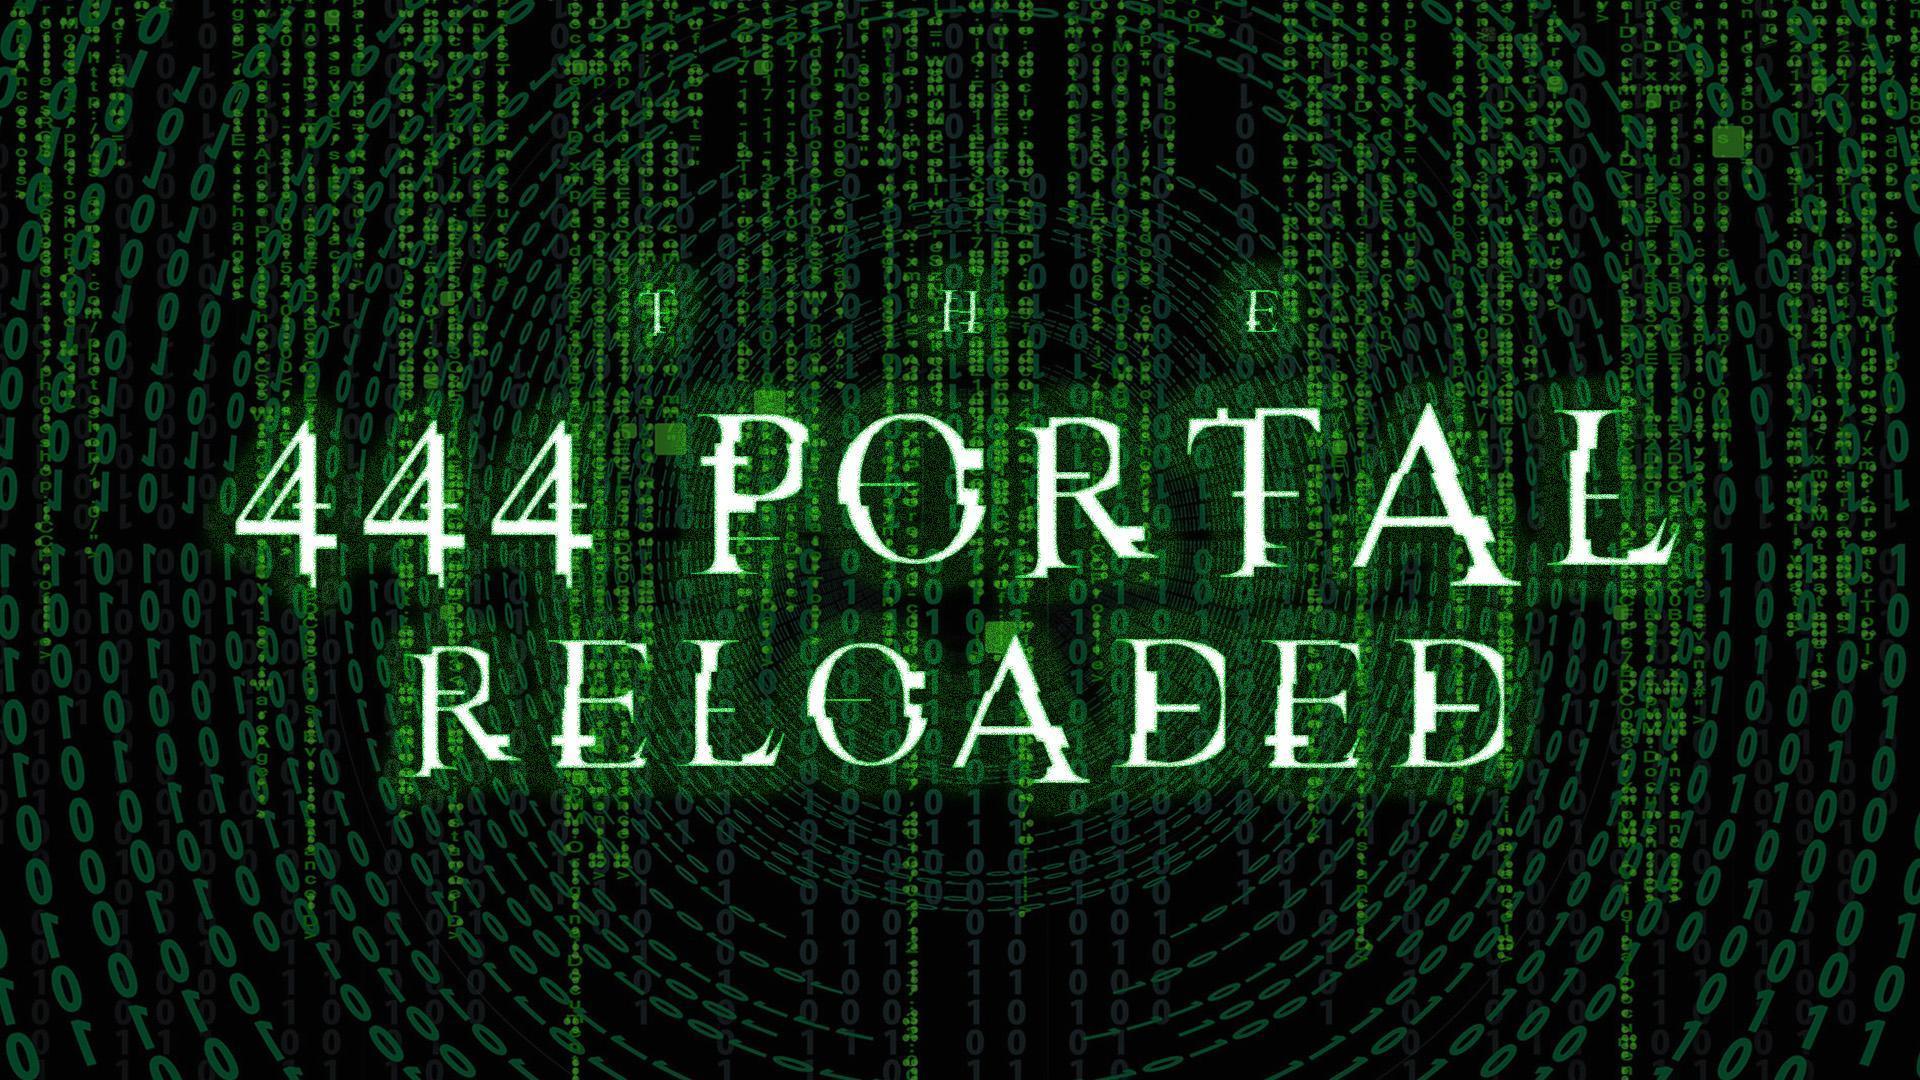 The 444 Portal Reloaded – Sacred Synchronicity